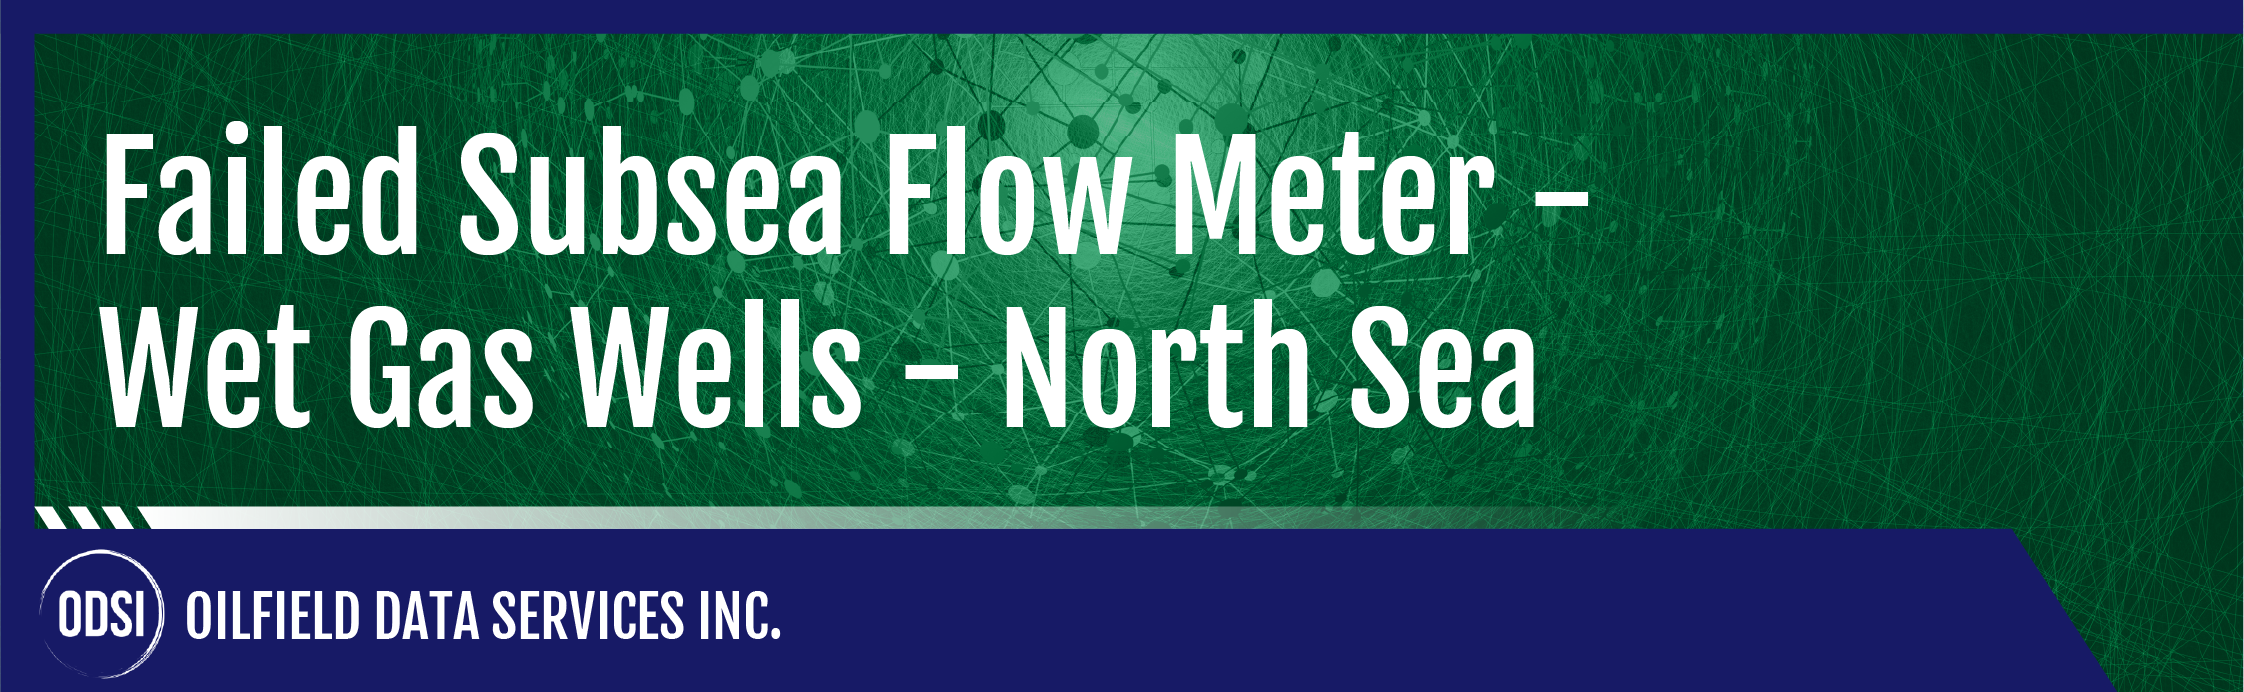 Failed Subsea Flow Meter - Wet Gas Wells - North Sea